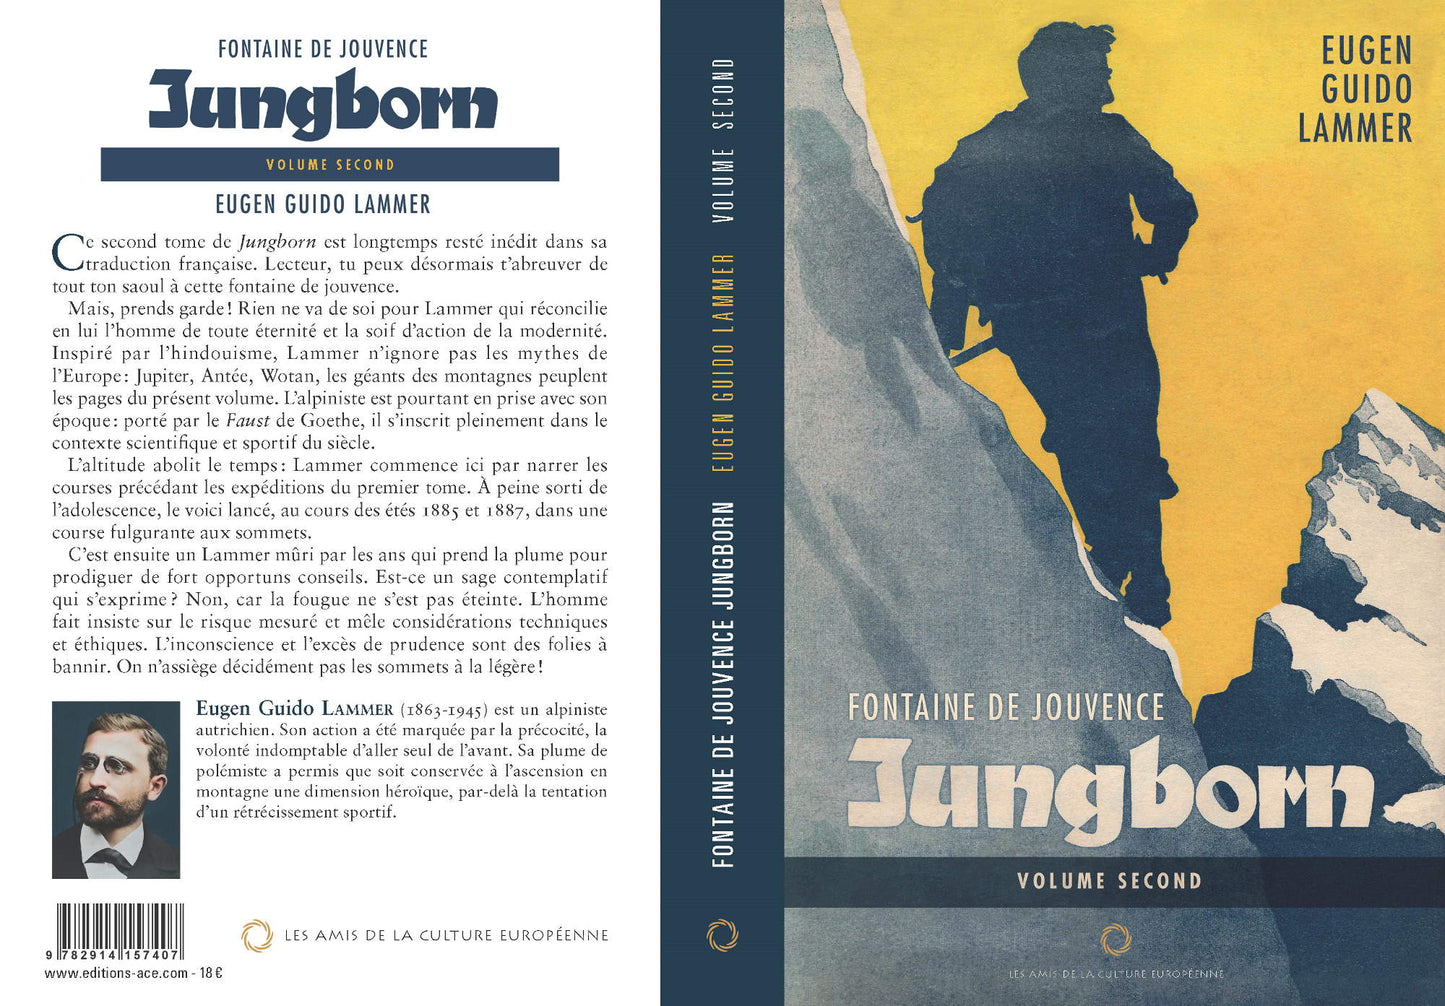 Jungborn – Fountain of Youth Volume 2 – Eugen Guido Lammer